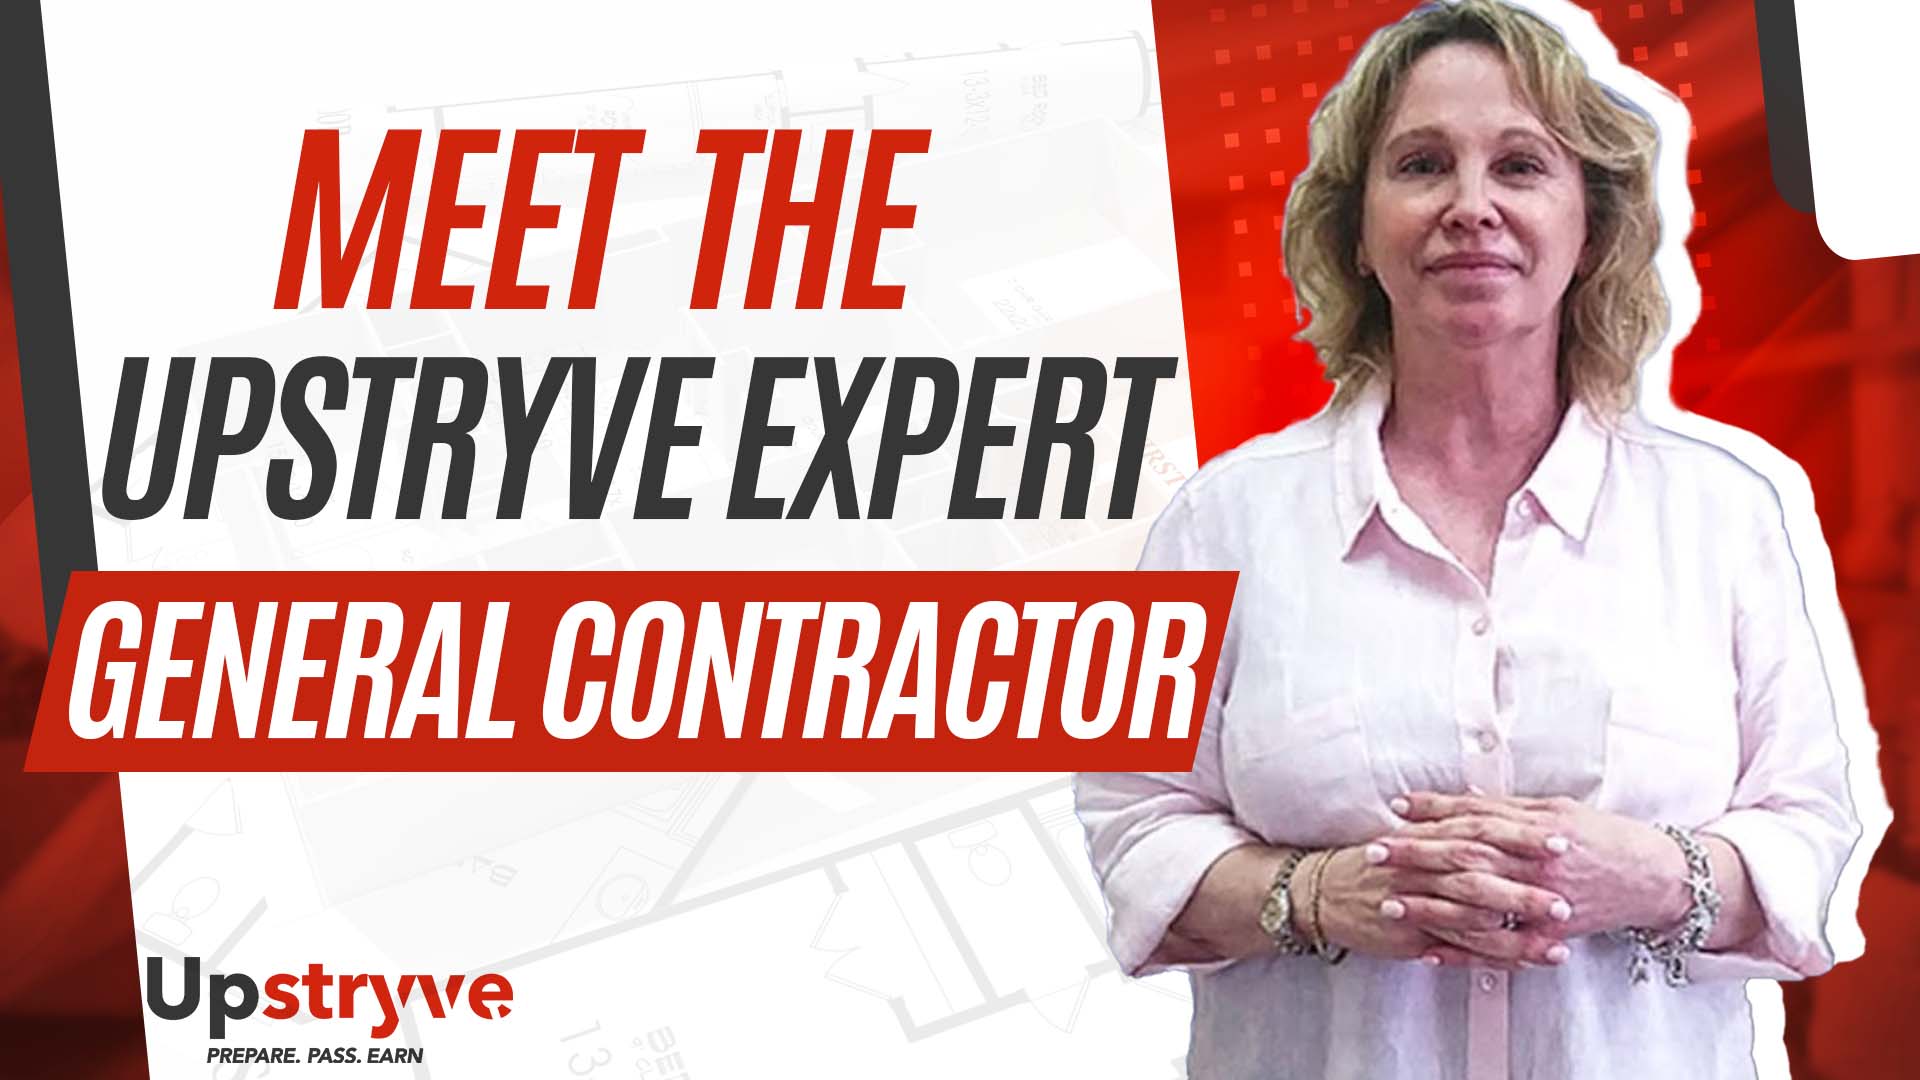 Meet one of Upstryve's experts Andrea Hoffman. Connect with her on our website and begin your journey to success.

Experience:
20 years of experience in the field and 10 years of tutoring

Education:
B.S. in Civil Engineering
MBA
Florida Certified General Contractor
Florida Certified Underground Utility and Excavation Contractor
Florida Certified Plumbing Contractor
Florida Home Inspector
Florida Real Estate Sales Associate

Tutoring Language: 
English

Need more help with your trade exam prep? Click here and match with one of our experts 👉 https://upstryve.com/

Interested in becoming a tutor? Join the team 👉 https://upstryve.com/pages/how-to-become-a-tutor

Subscribe to our channel: http://bit.ly/UpStryveYouTubeChannel
Join us on Facebook: https://www.facebook.com/upstryveinc
Follow us on Instagram : https://www.instagram.com/upstryve

Upstryve connects the future tradespeople of America with industry experts for a personalized 1 on 1 tutoring experience. Get the expert guidance you need to pass your trade exam and get your license. Our instructors specialize in exam preparation for general contractor, electrical contractor, plumbing contractor, HVAC and more.

#Upstryve #GeneralContractor #TradeProfessional